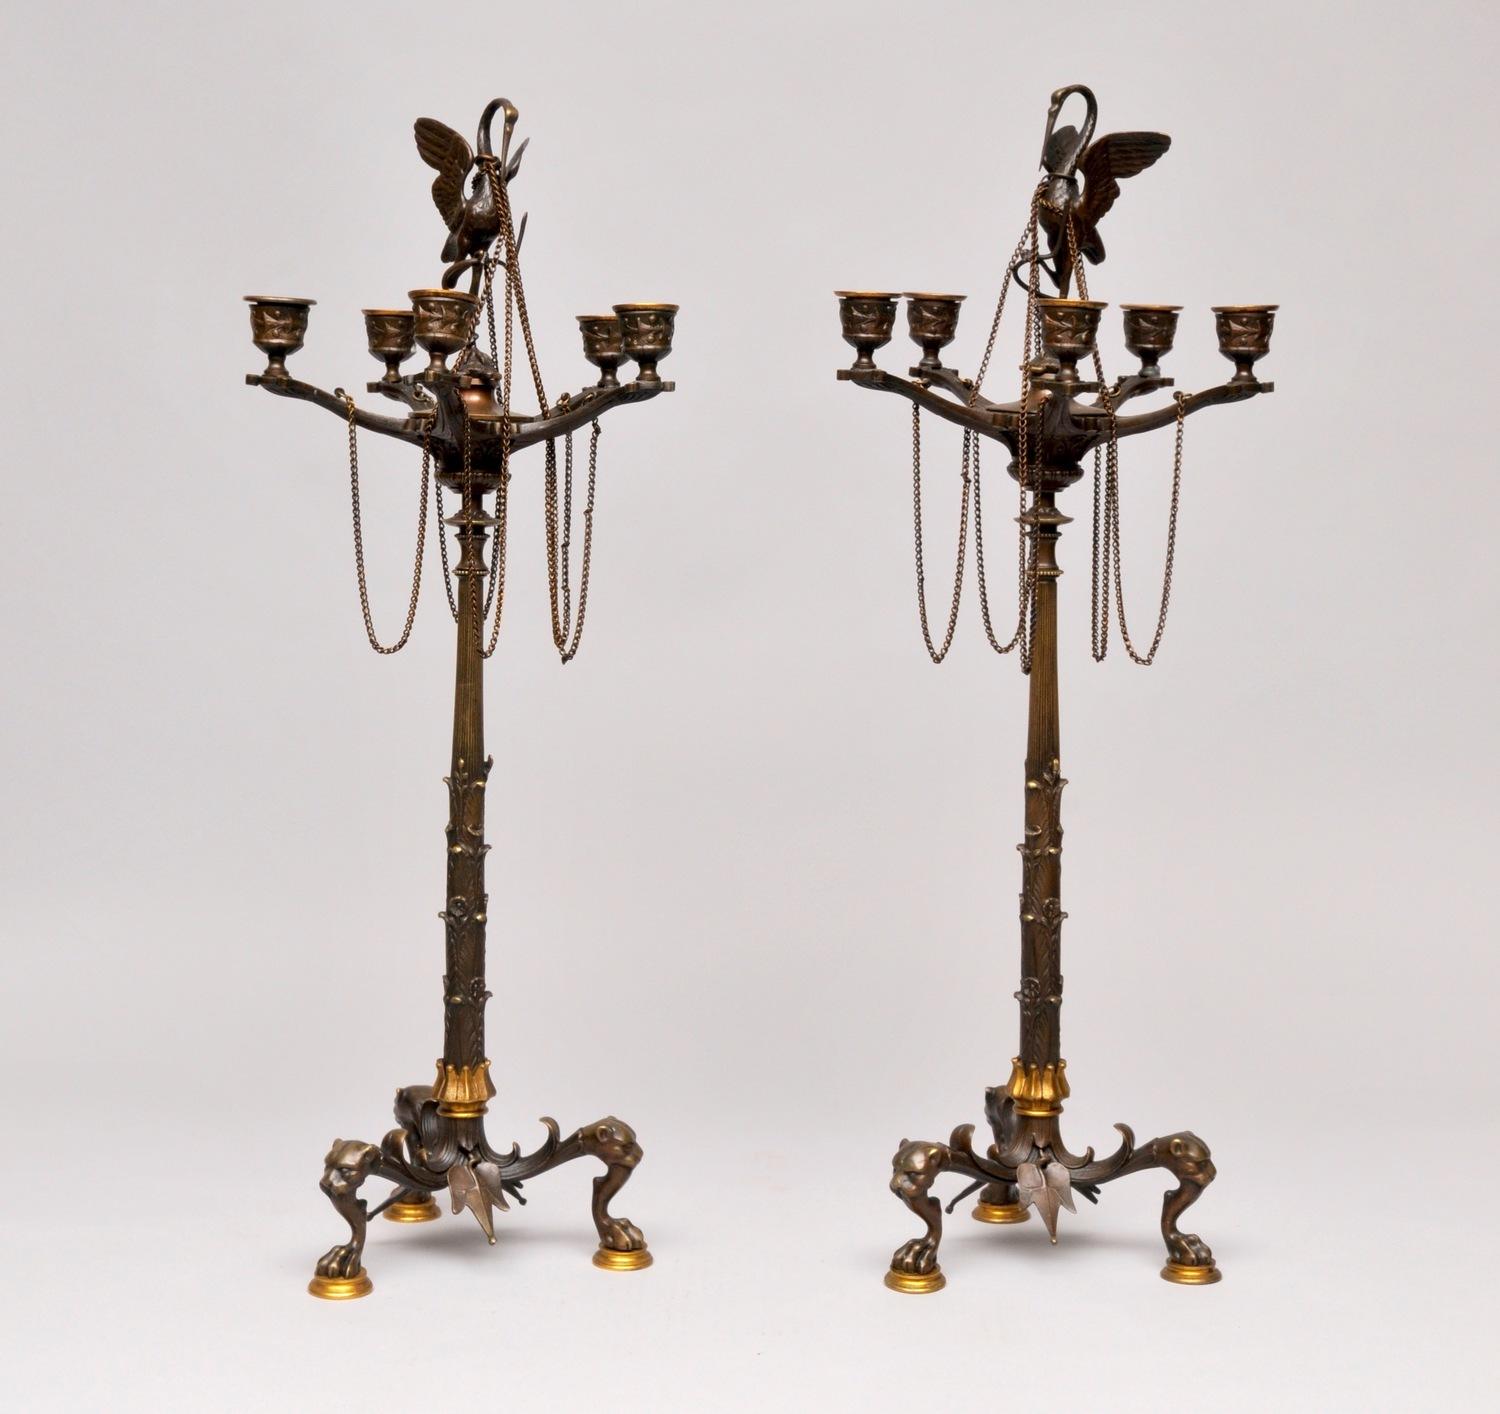 A pair of bronze Victorian candlesticks circa 1840-1860

Empire style. Measure: H 63cm

A beautiful pair of candelabra in the Empire style, of the Victorian era. With five candle holders, an elegant swan rising above and gilt detail on the feet